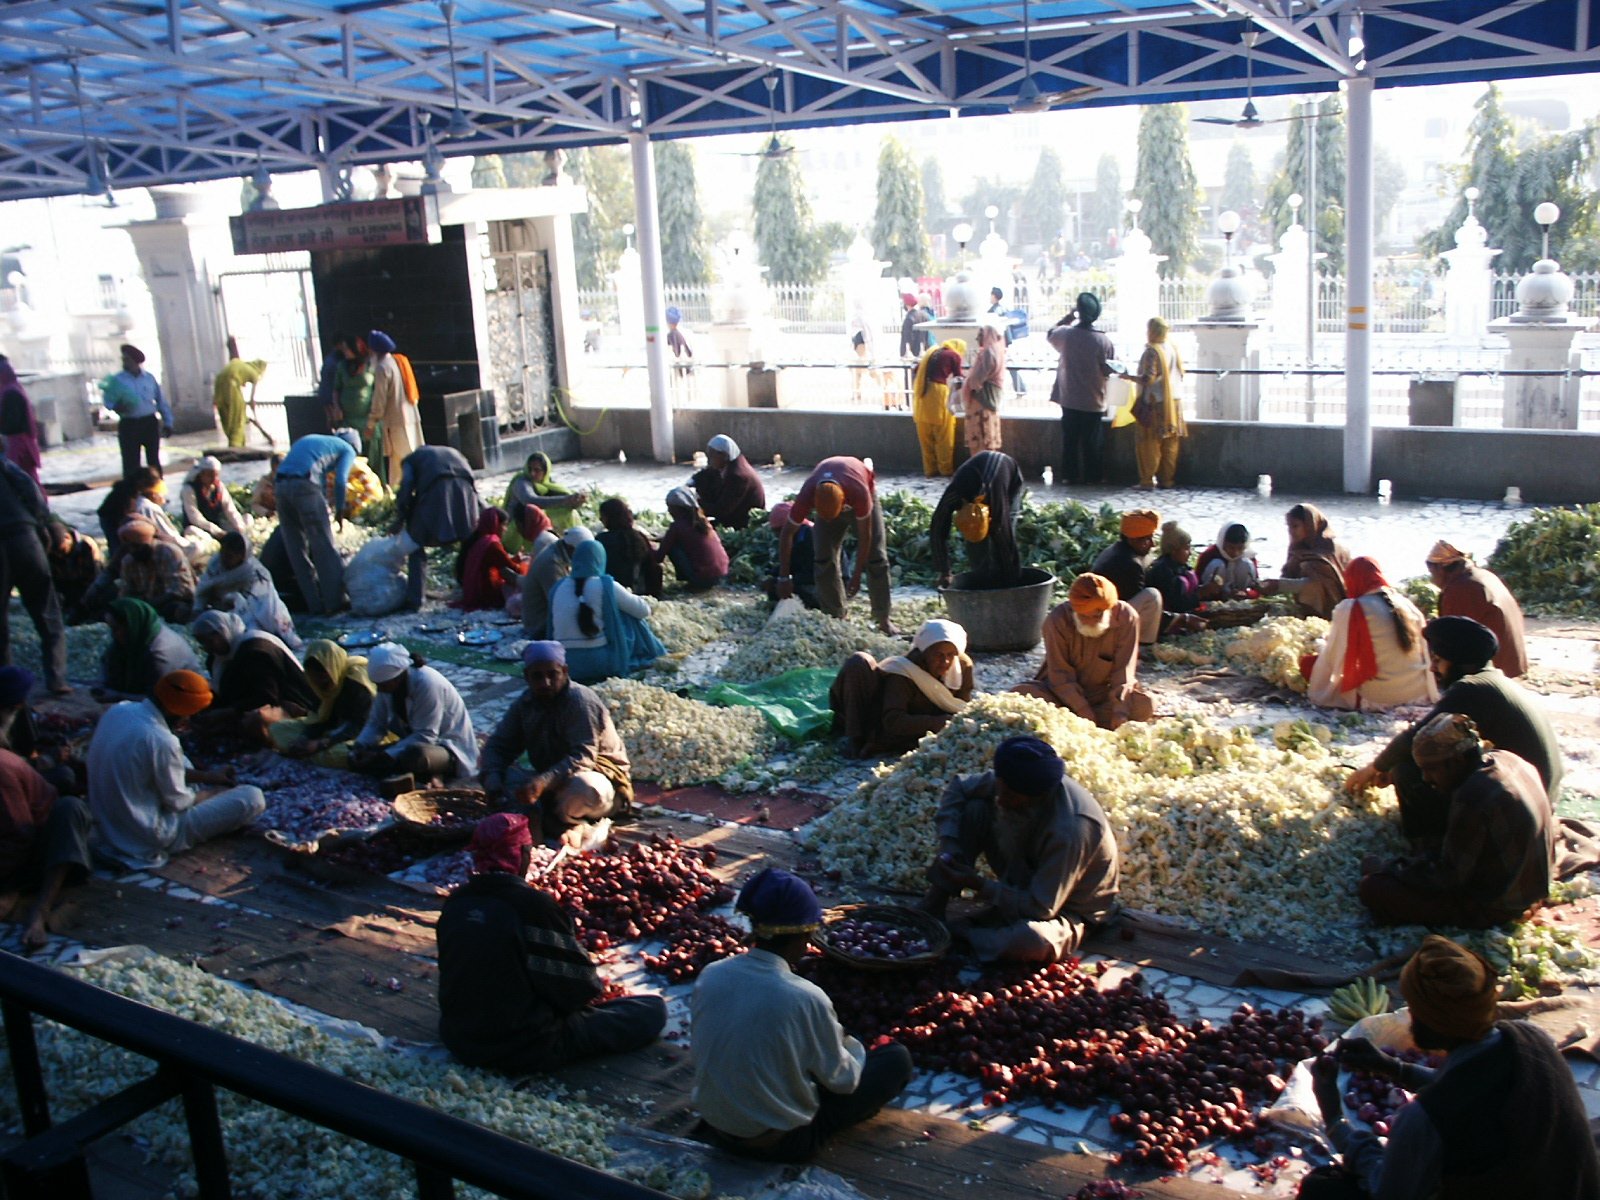 A_group_of_volunteers_helping_with_daily_food_preparation_for_Langar_at_the_Golden_Temple.jpg